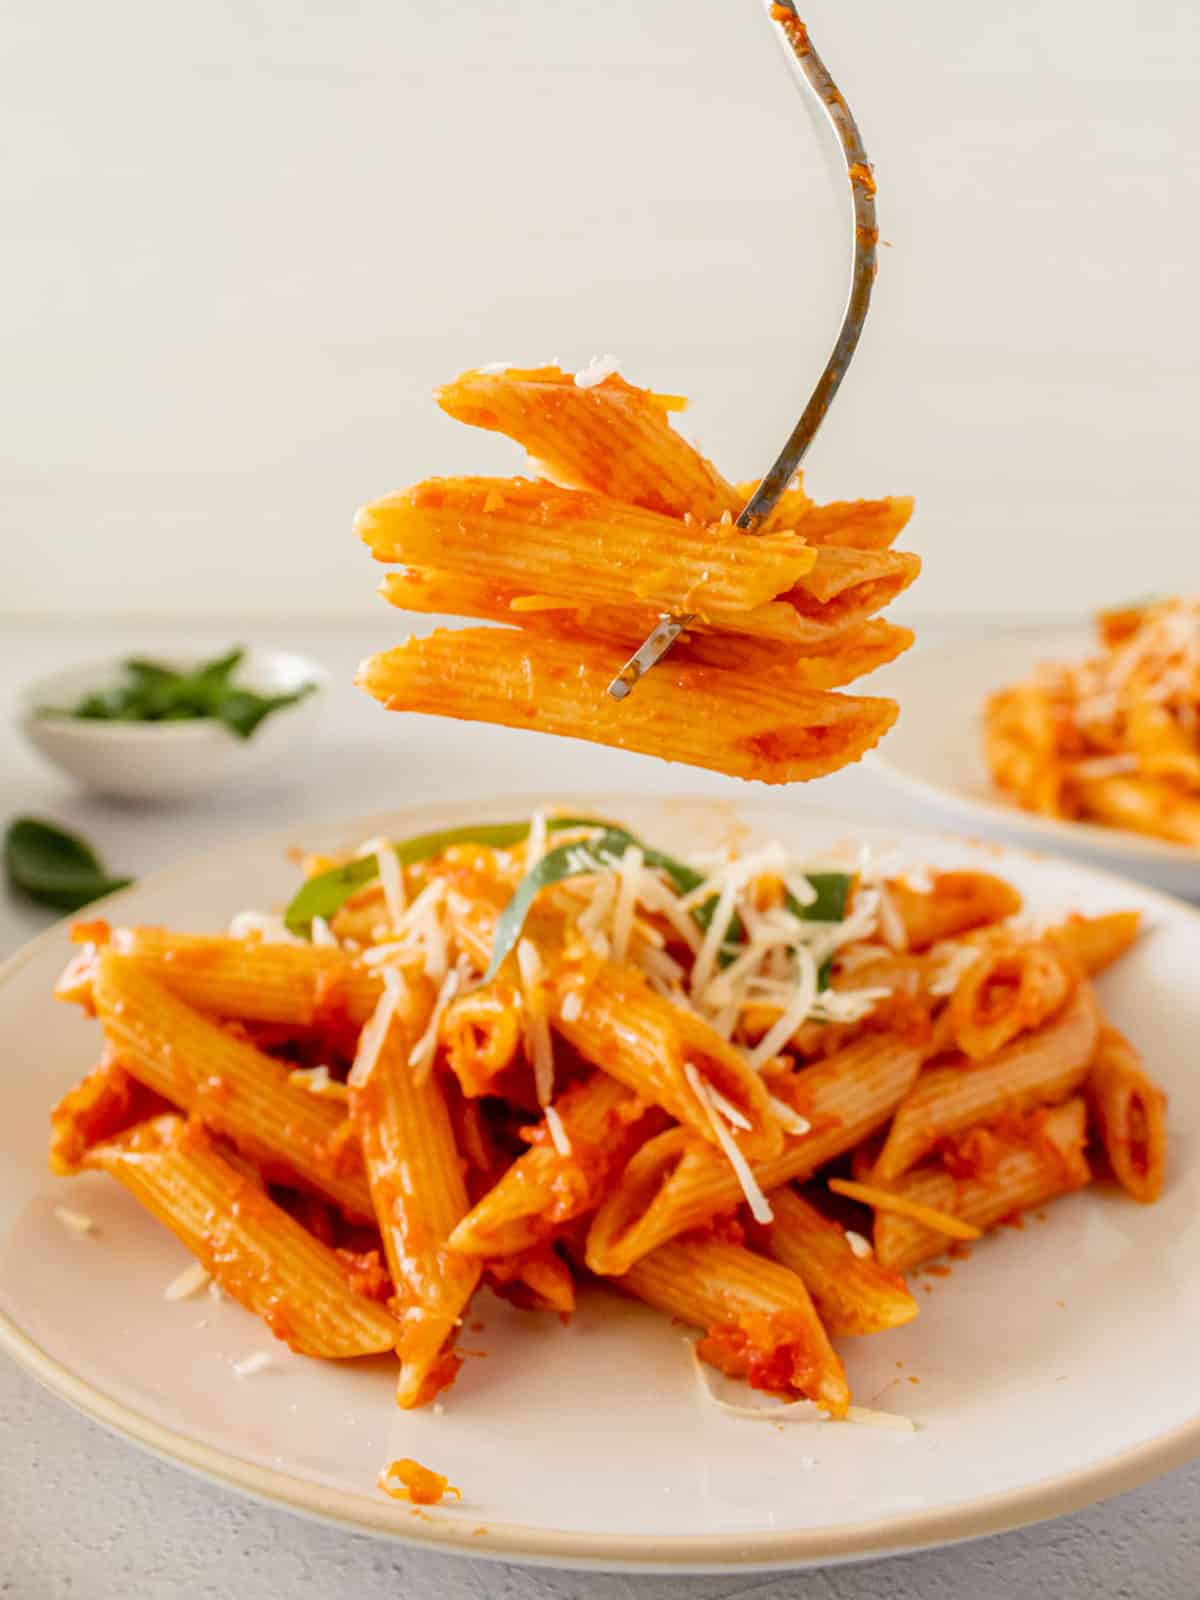 A forkful of penne pasta with tomato and vegetable sauce.